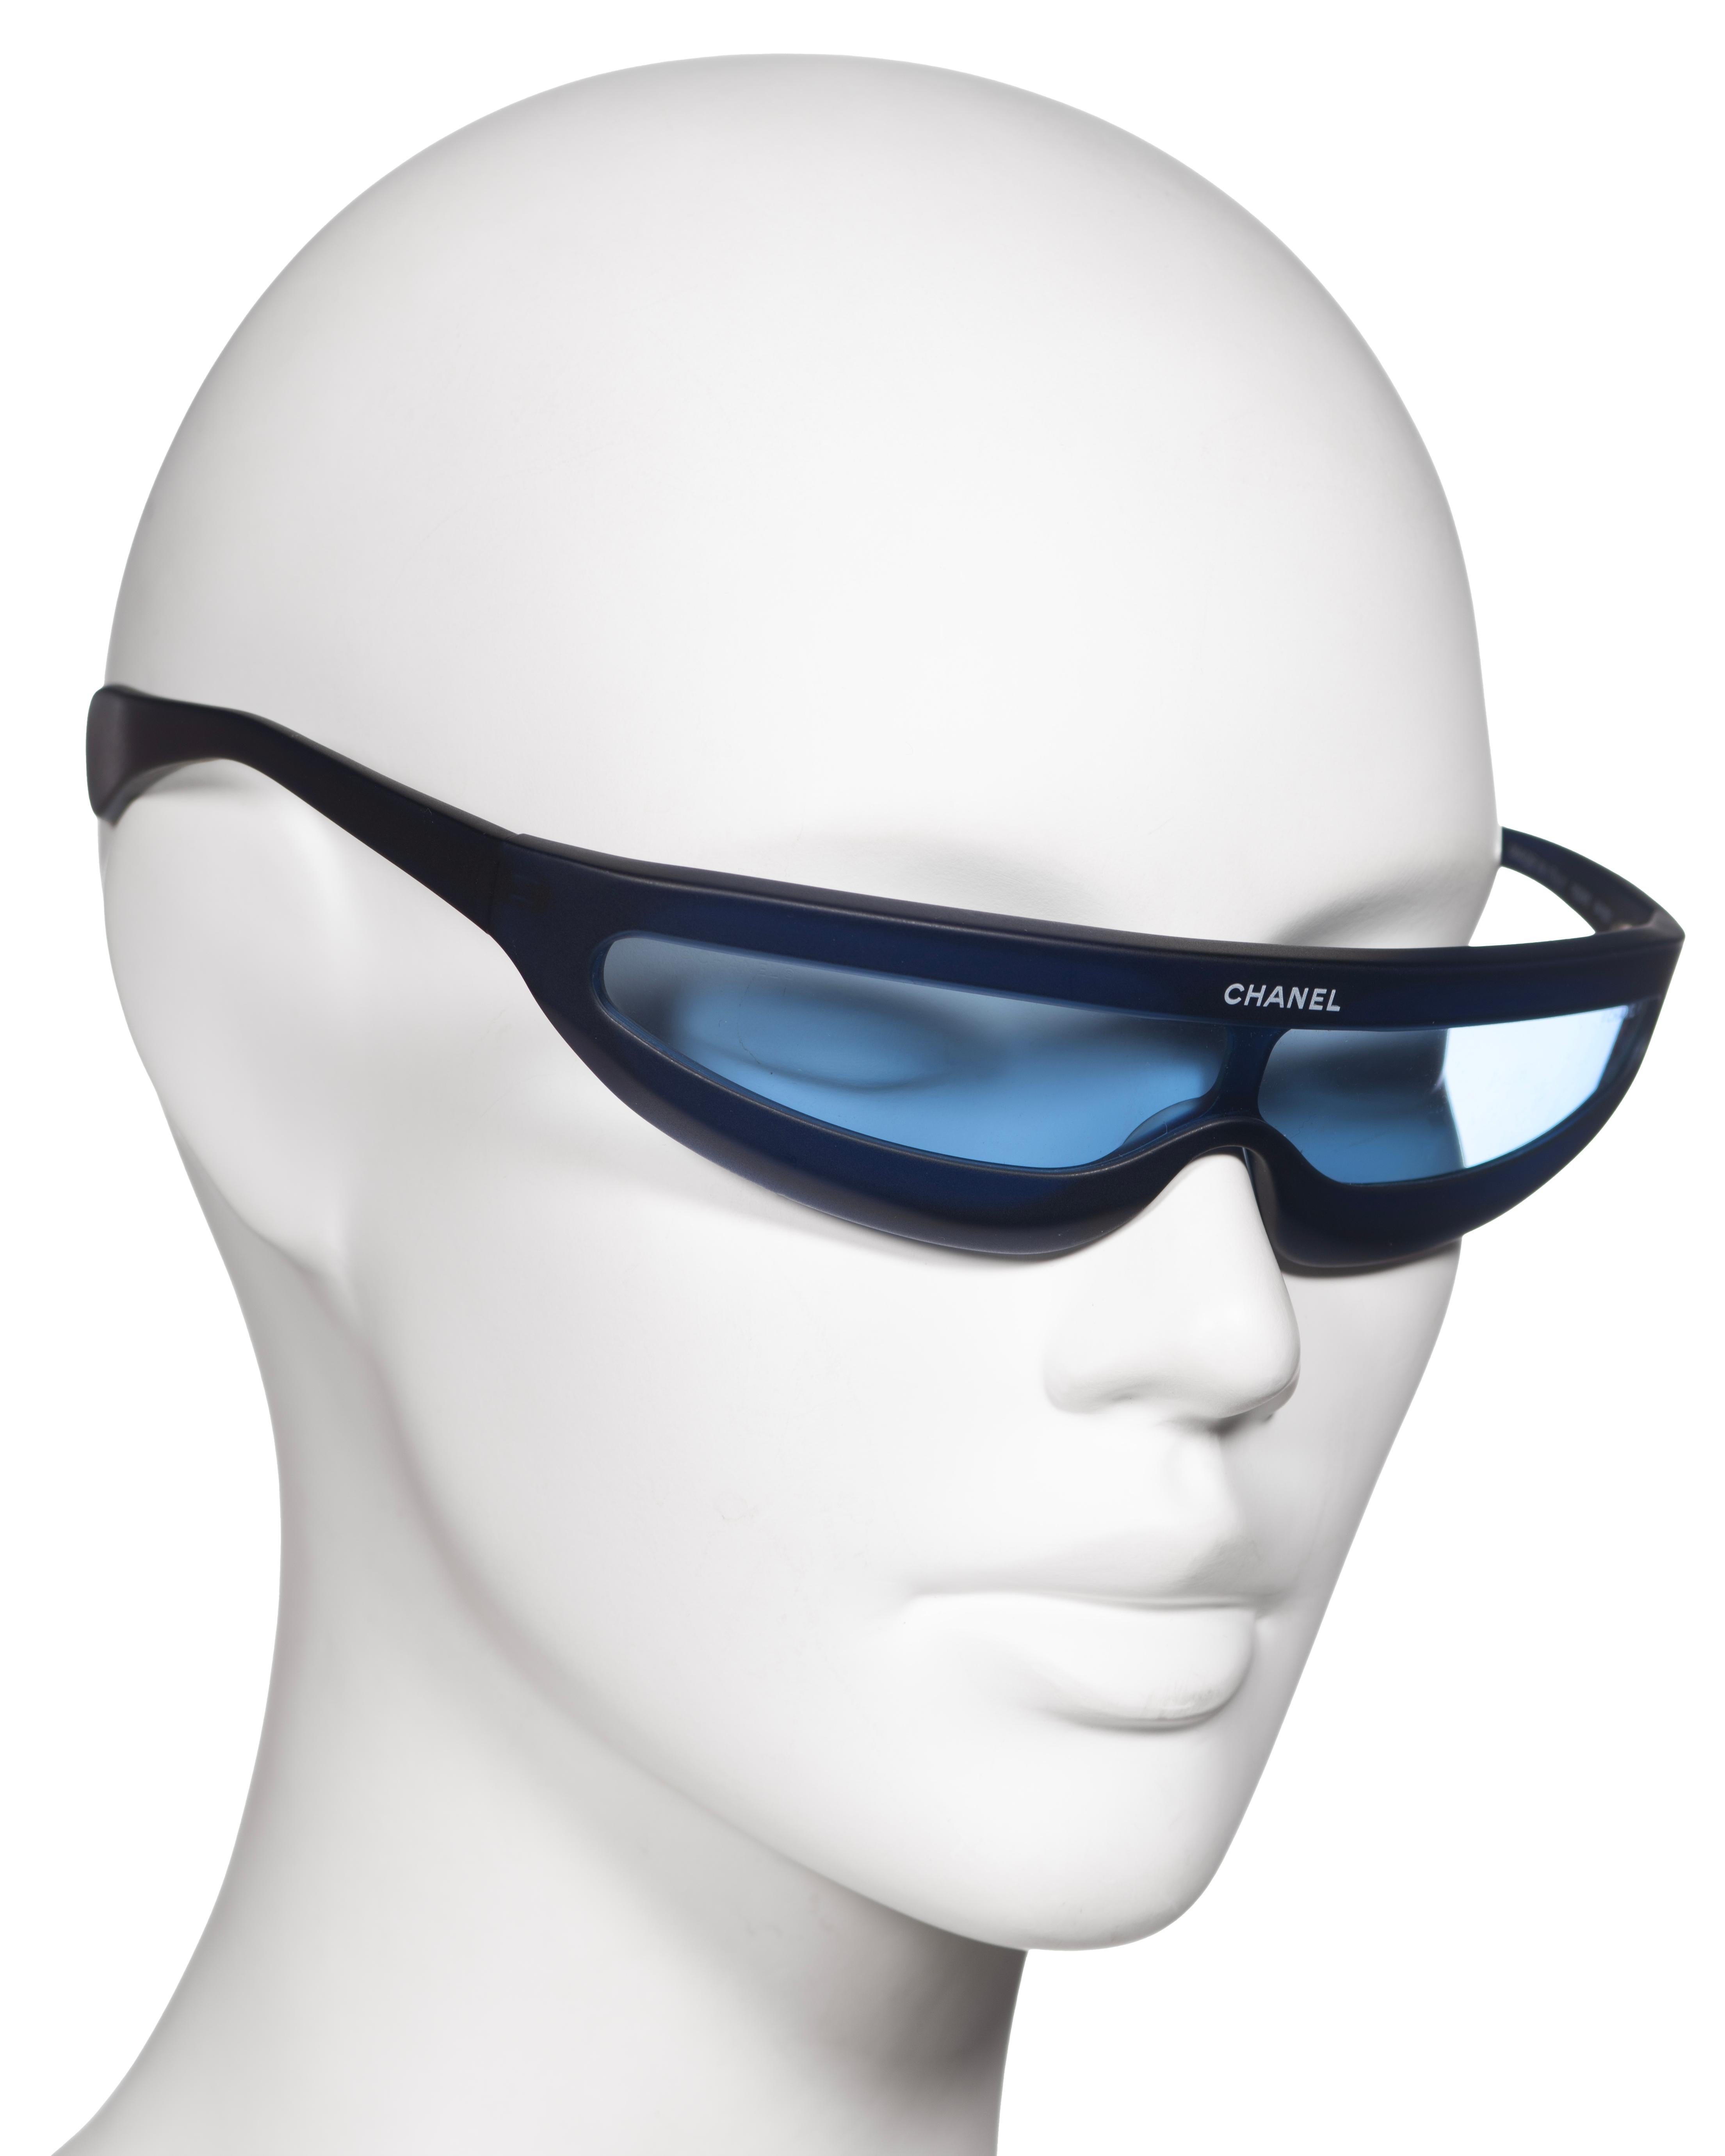 Chanel by Karl Lagerfeld Blue Monolens Sunglasses, ss 2001 2